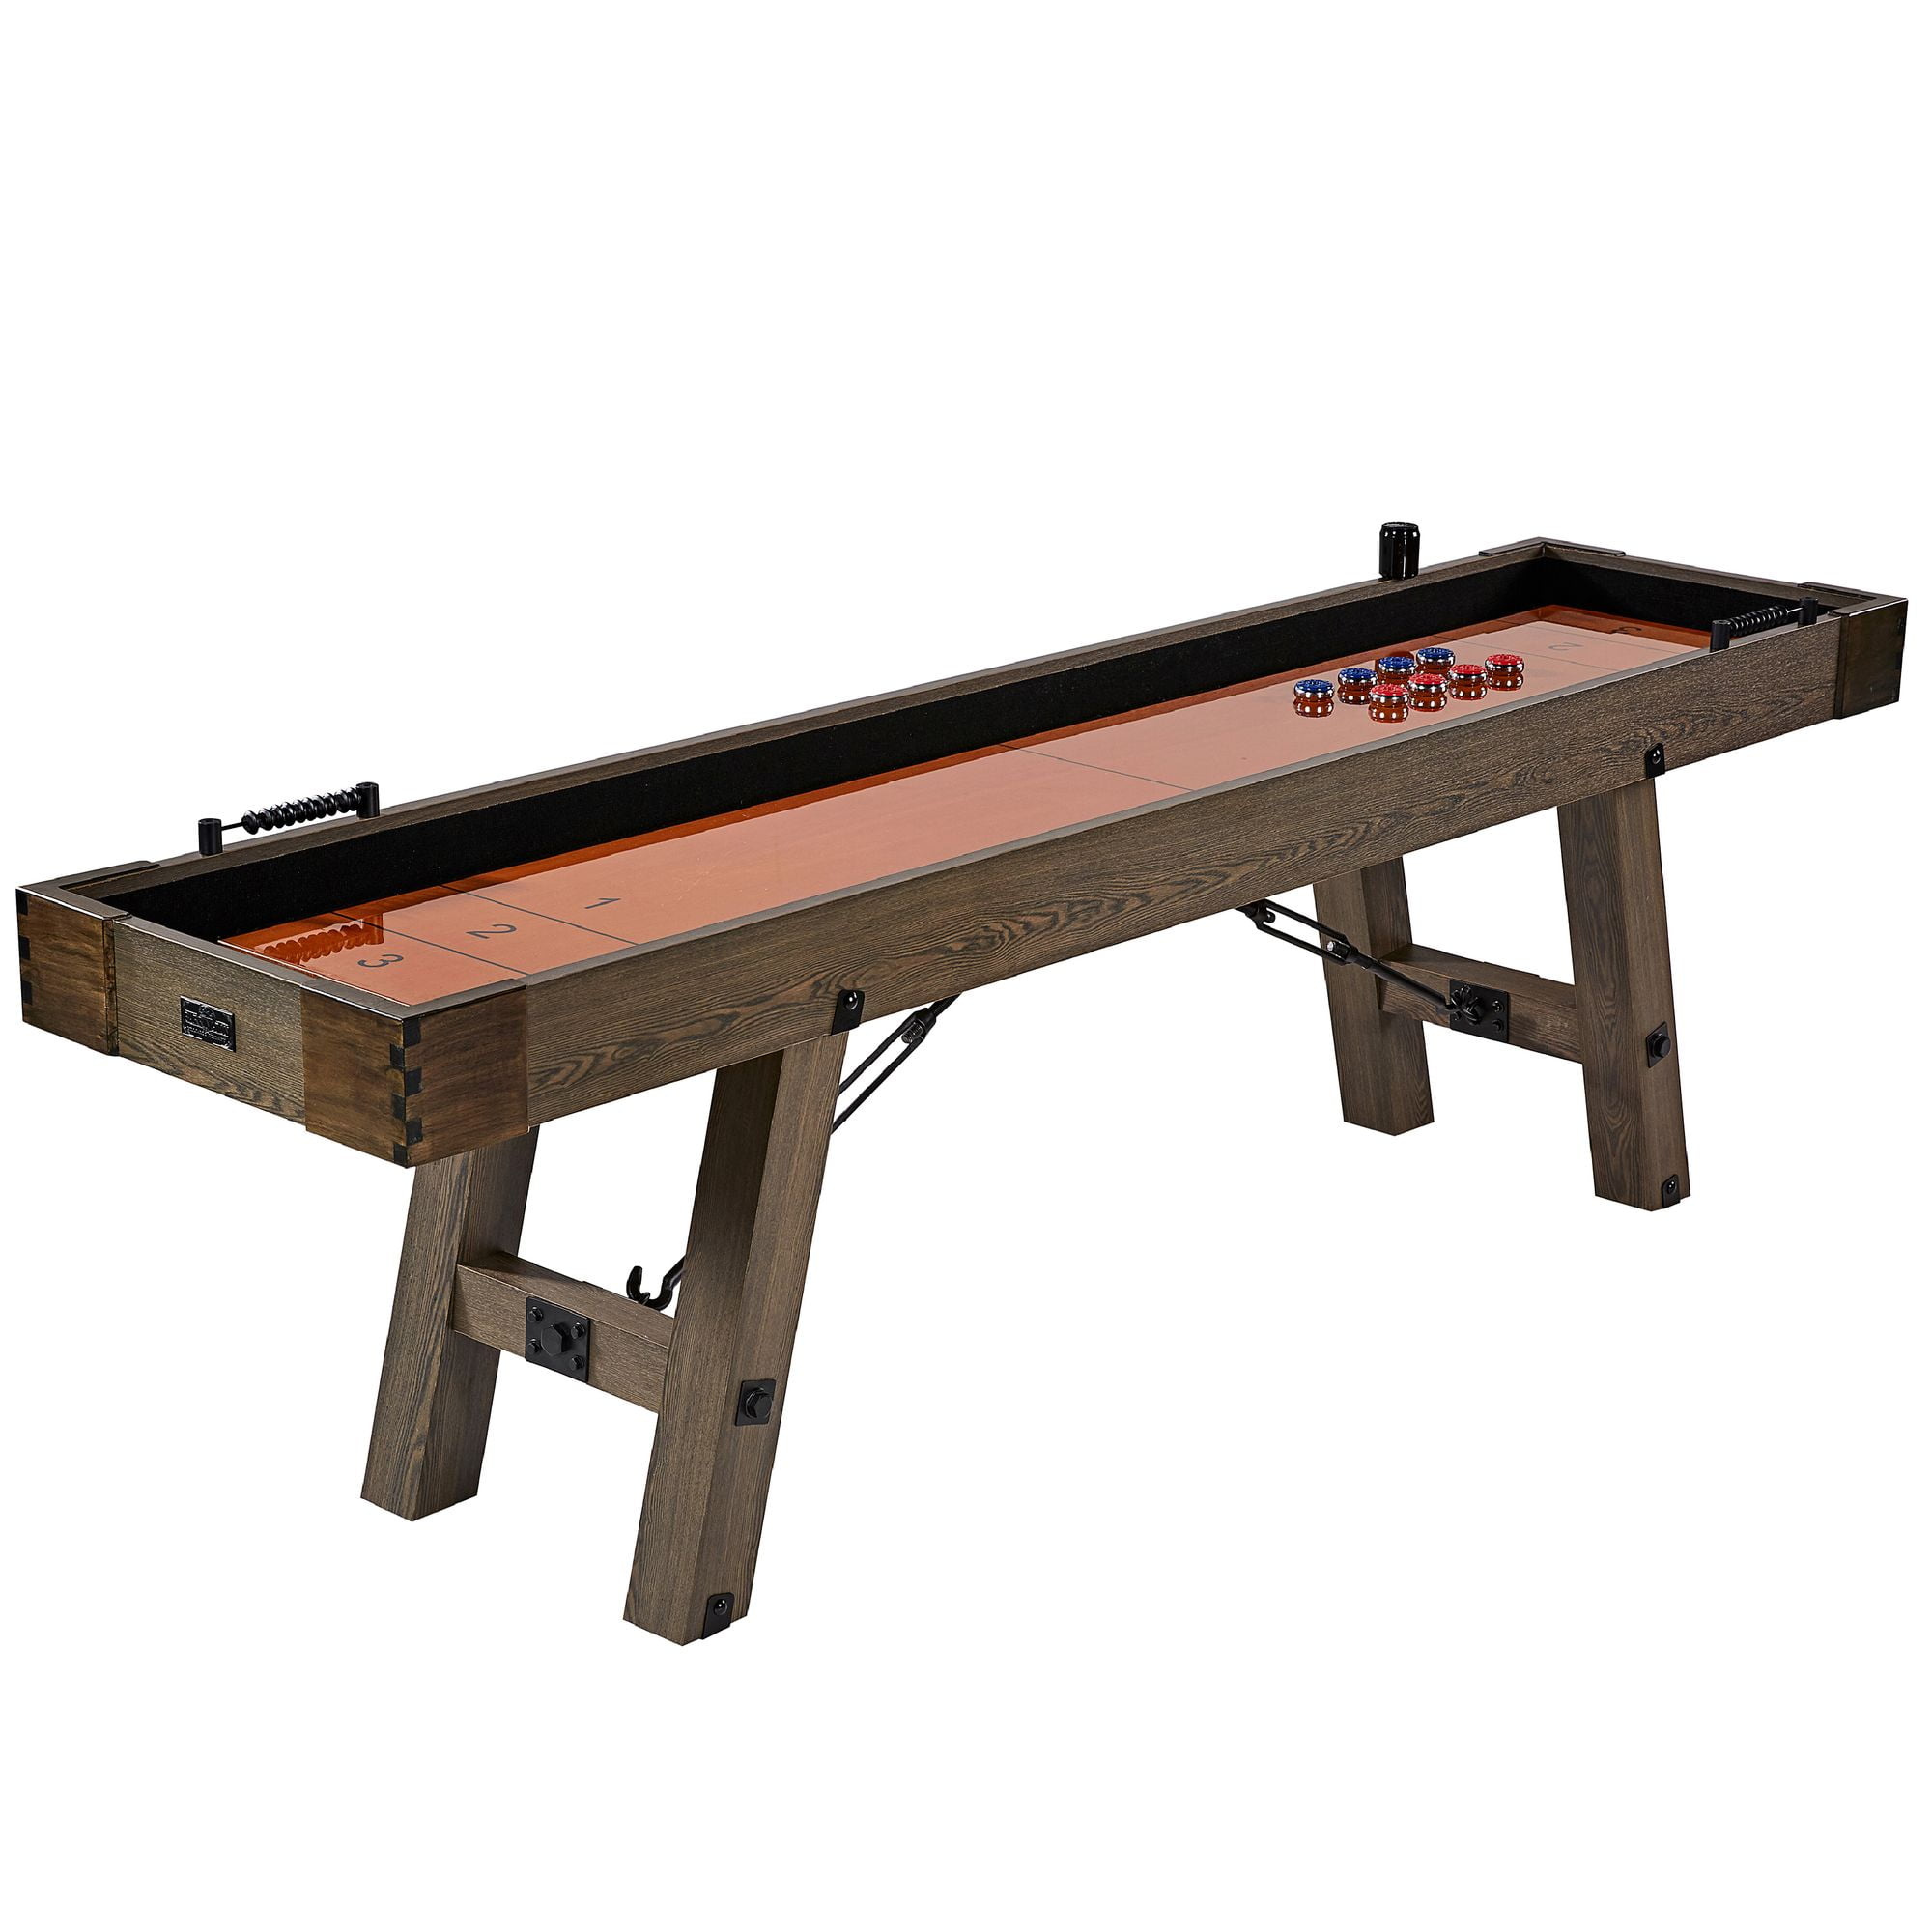 Barrington Tabletop Sling Shuffleboard Game Table 3 Pucks Included for sale online 